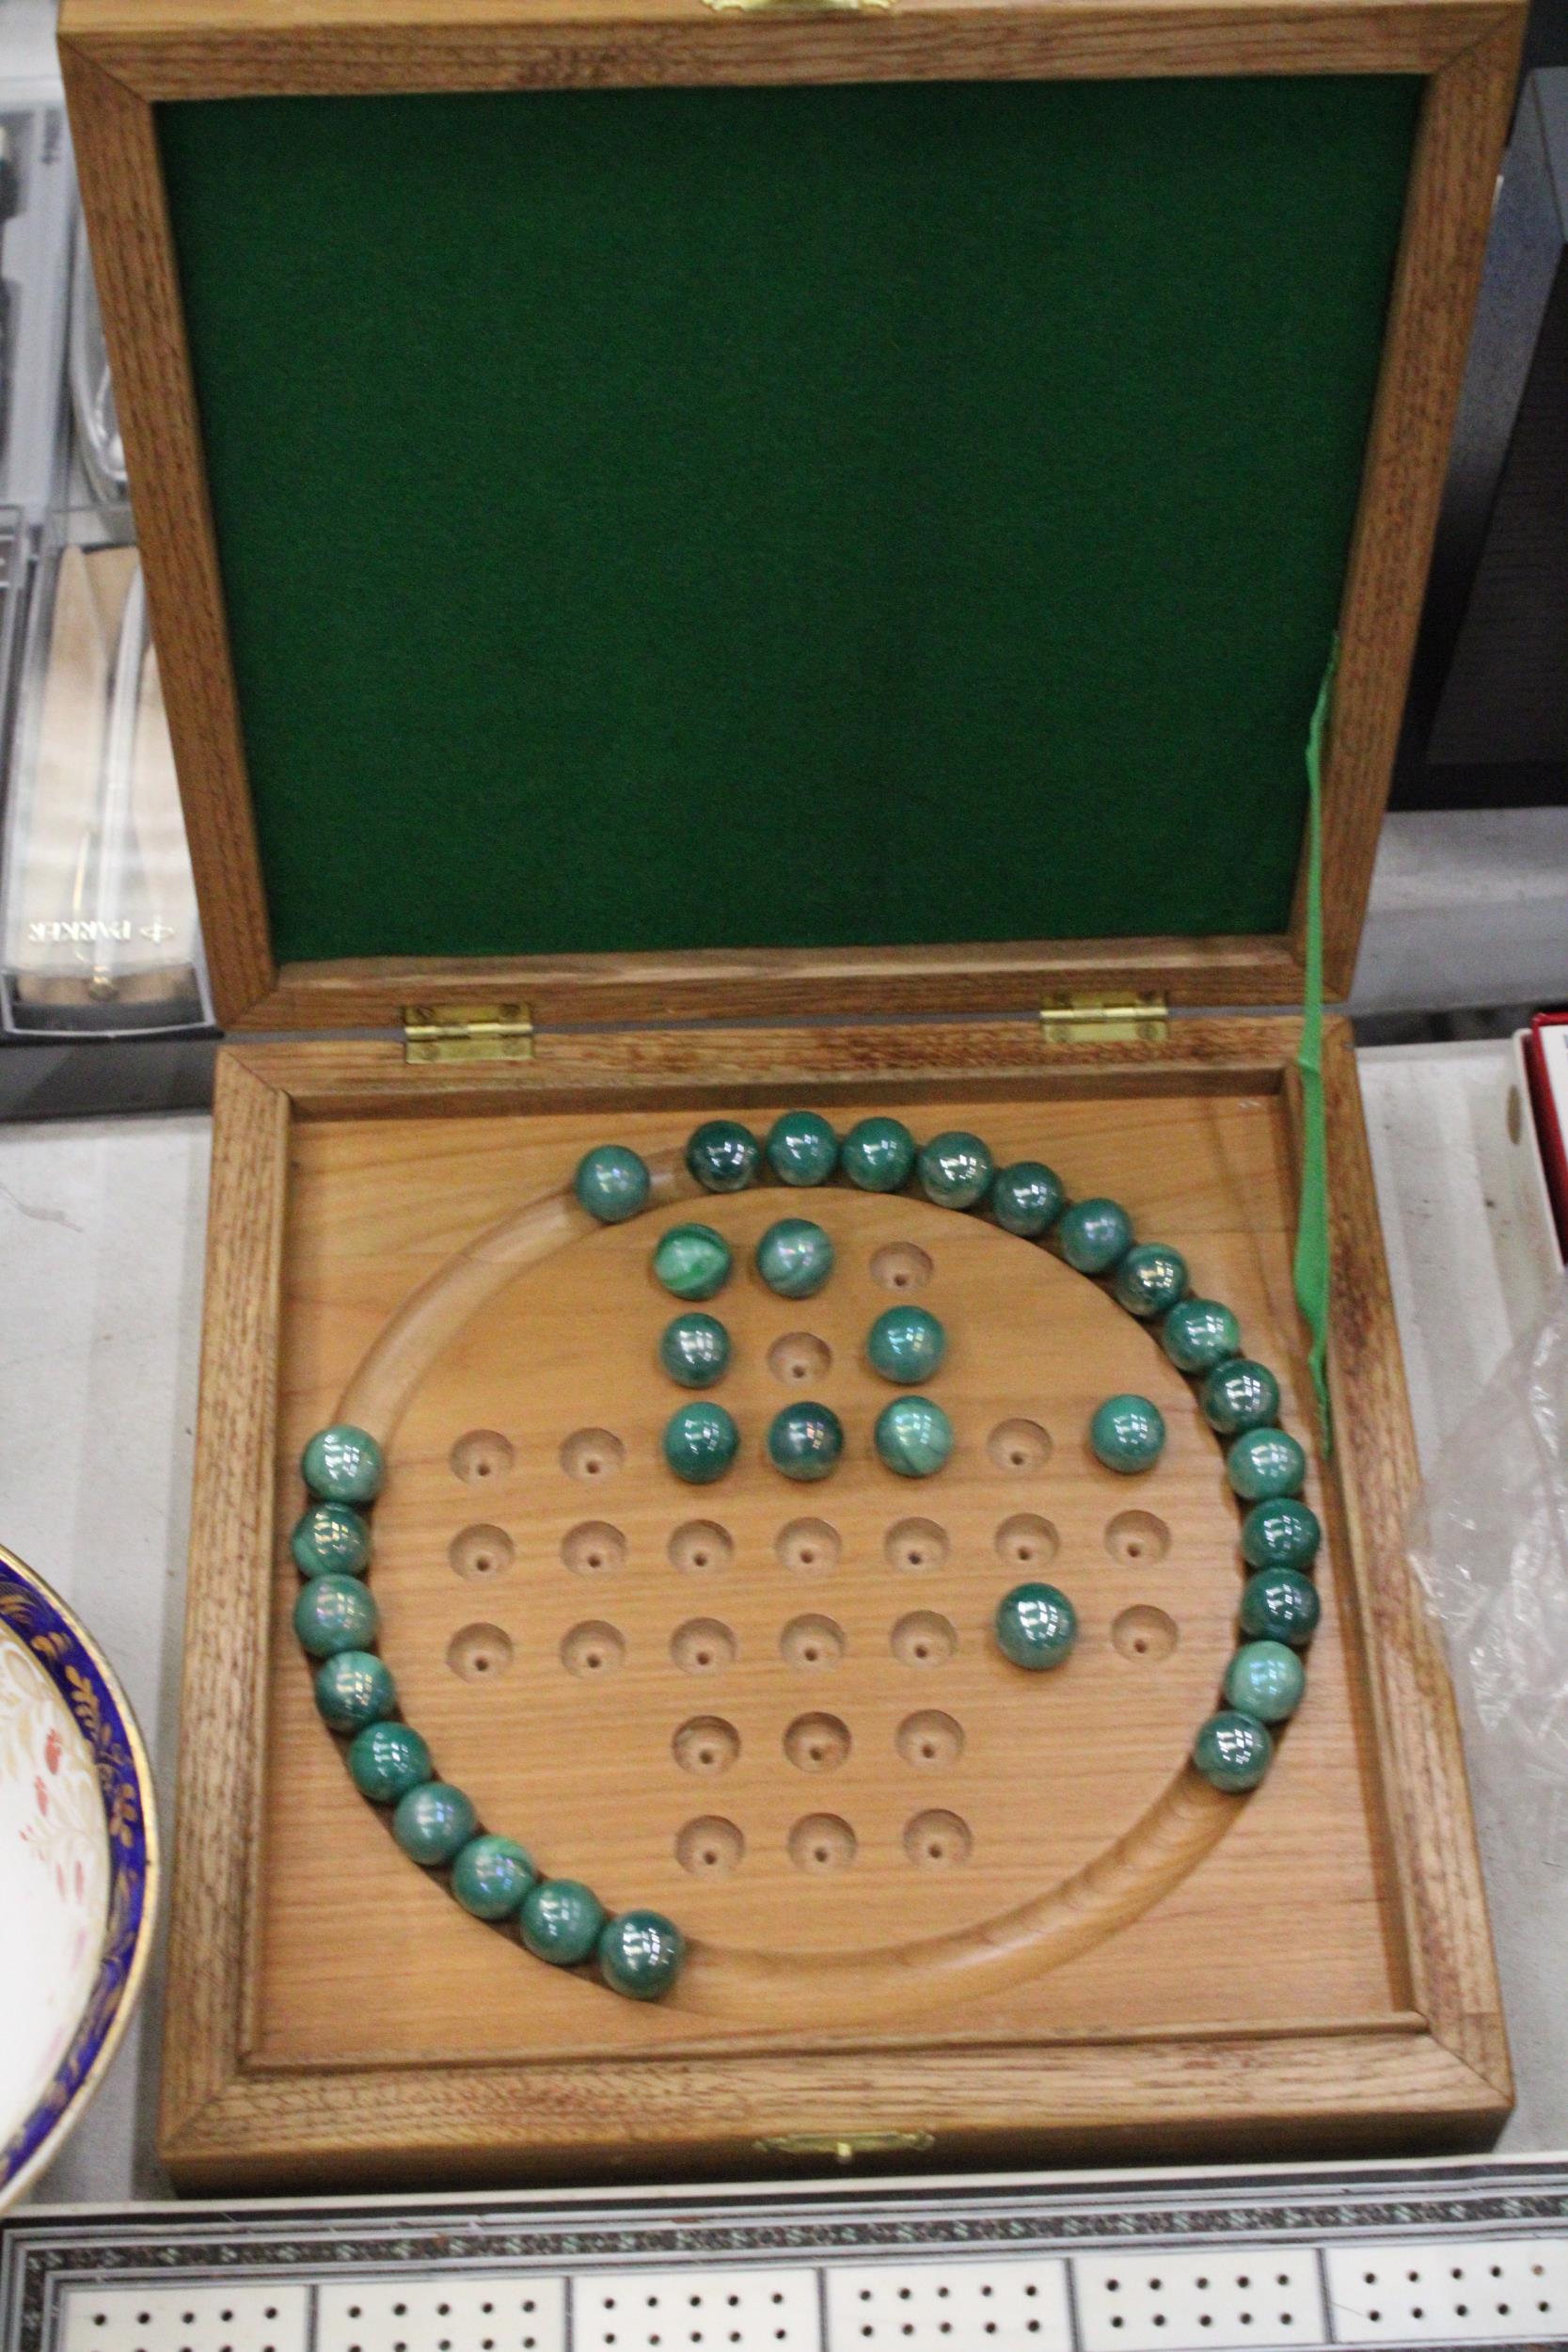 A BOXED WOODEN SOLITAIRE BOARD WITH MARBLES PLUS A VINTAGE CRIBBAGE BOARD - Image 2 of 5